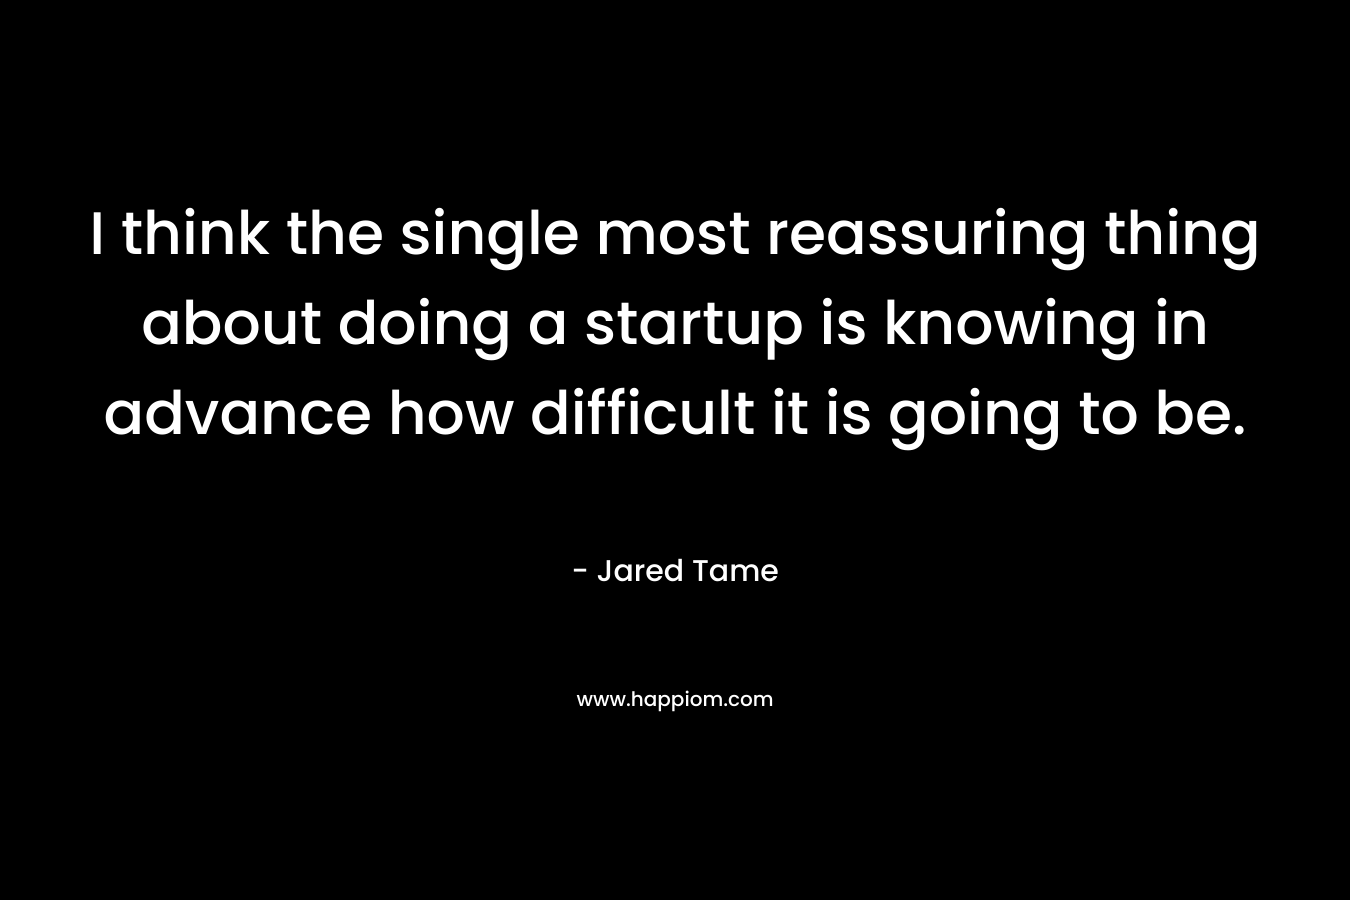 I think the single most reassuring thing about doing a startup is knowing in advance how difficult it is going to be.